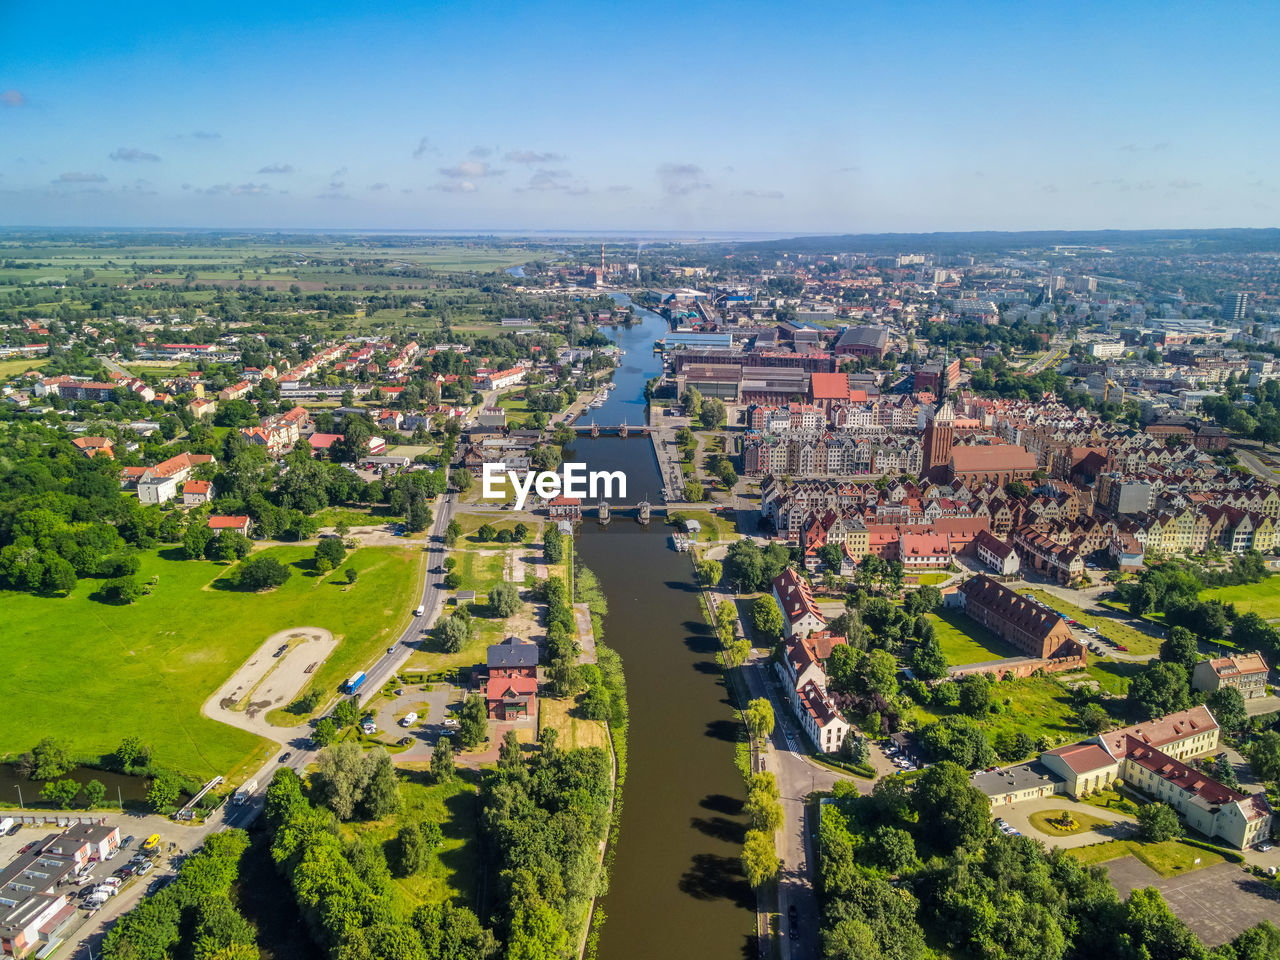 Aerial view of the old town in elblag, poland